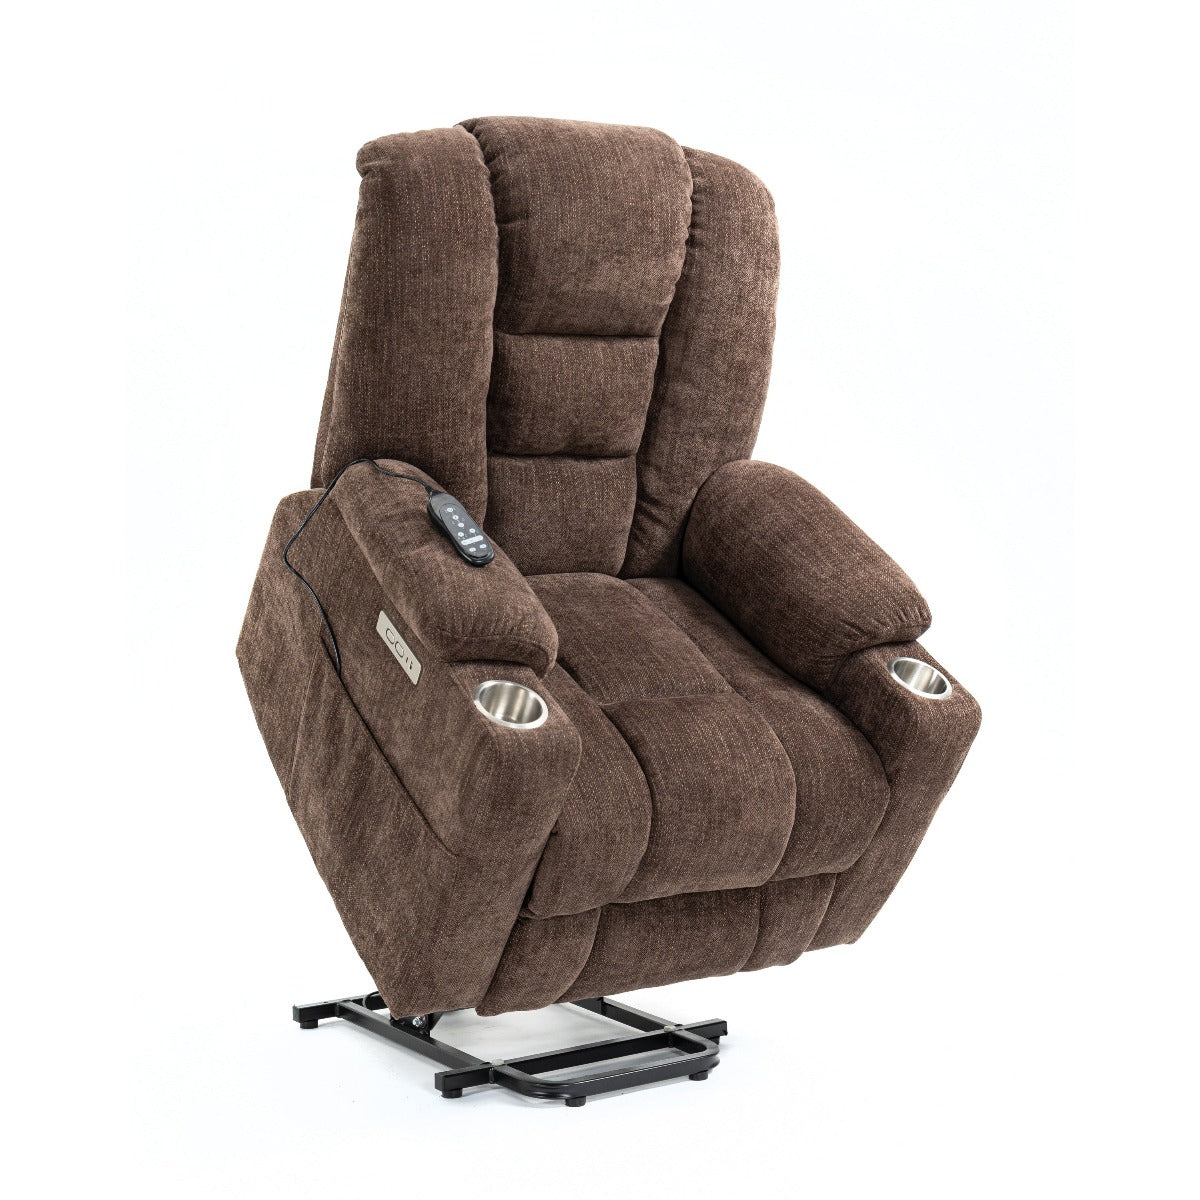 EMON's Power Lift Recliner, lifted angle view - My Lift Chair